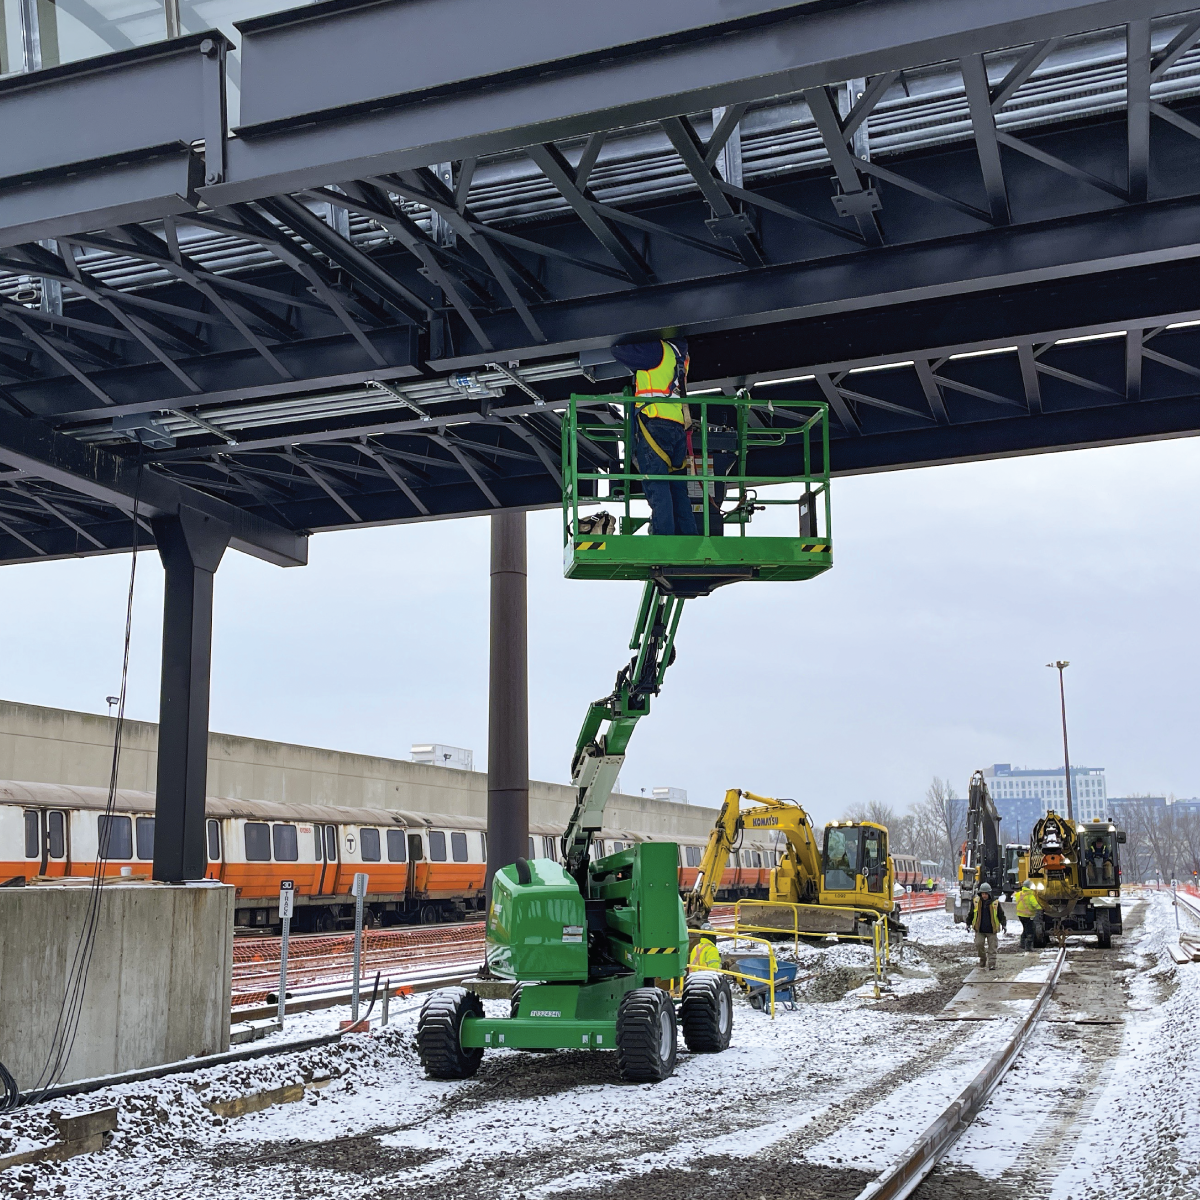 A crew member in a lift installing rail from under a bridge on a snowy day